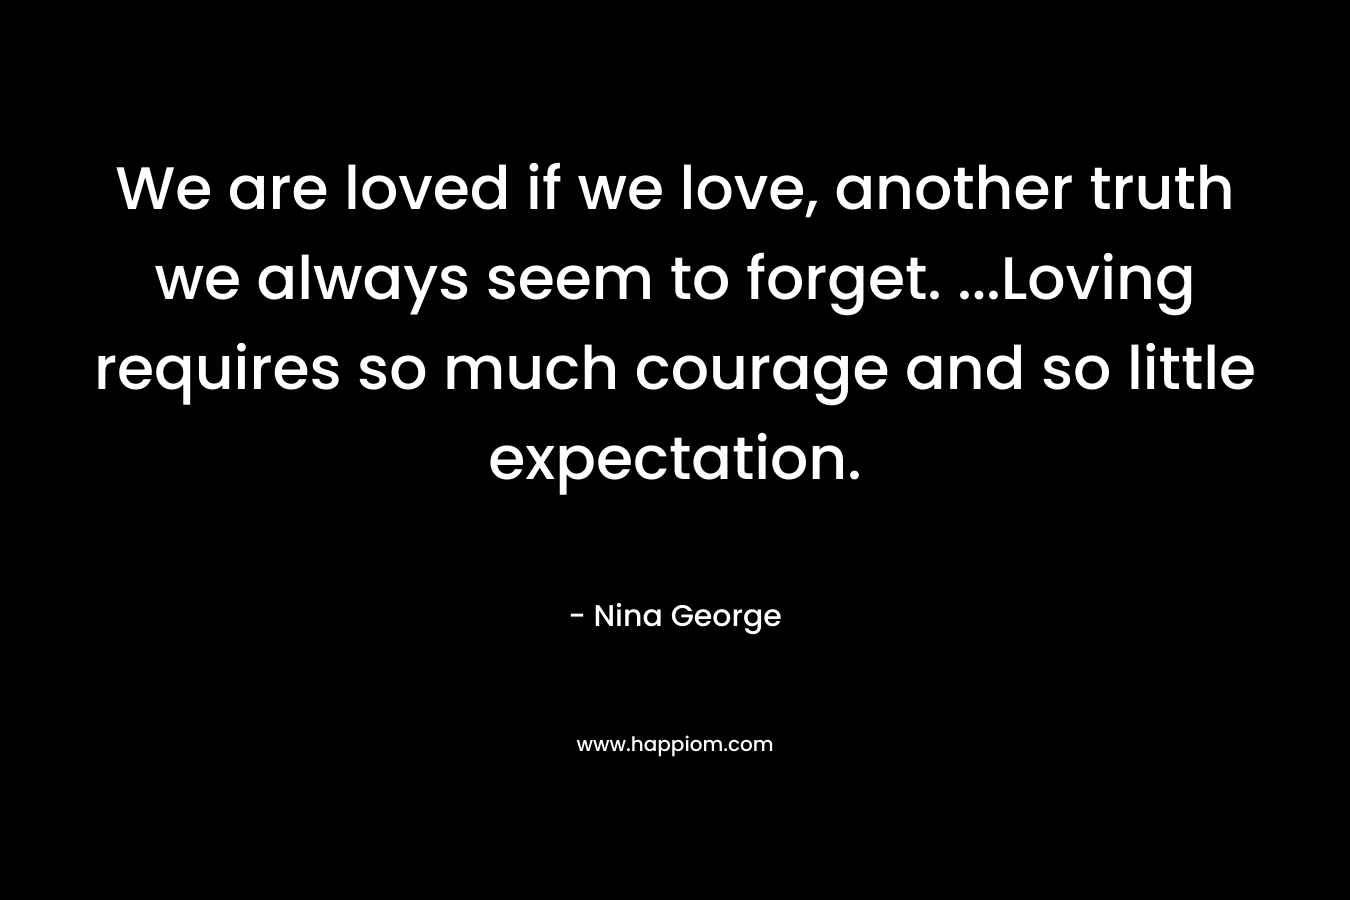 We are loved if we love, another truth we always seem to forget. ...Loving requires so much courage and so little expectation.